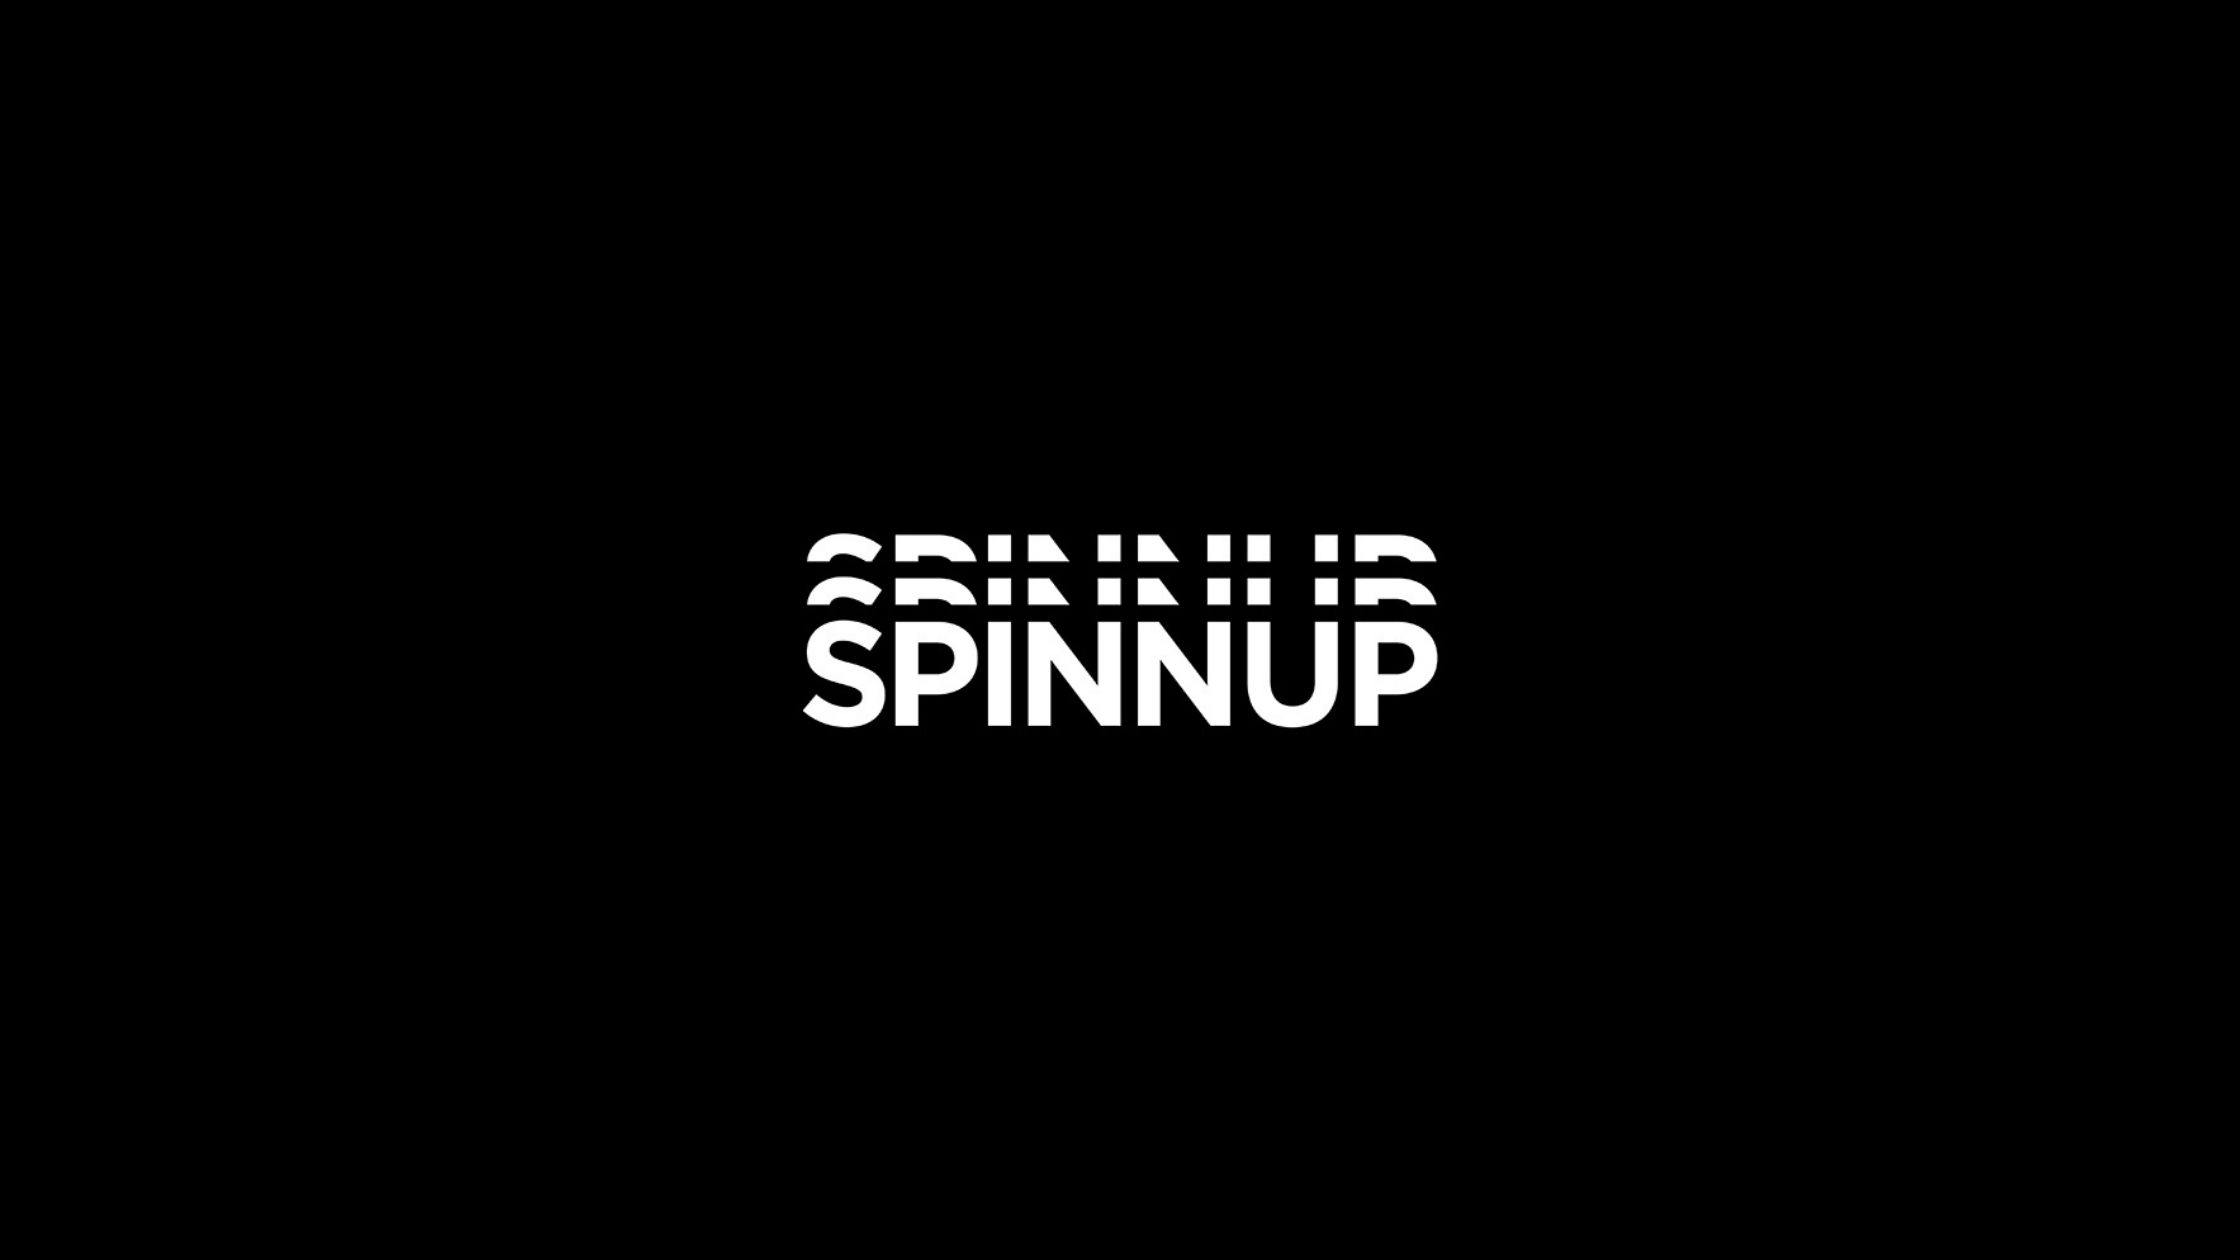 Spinnup switches to invite-only